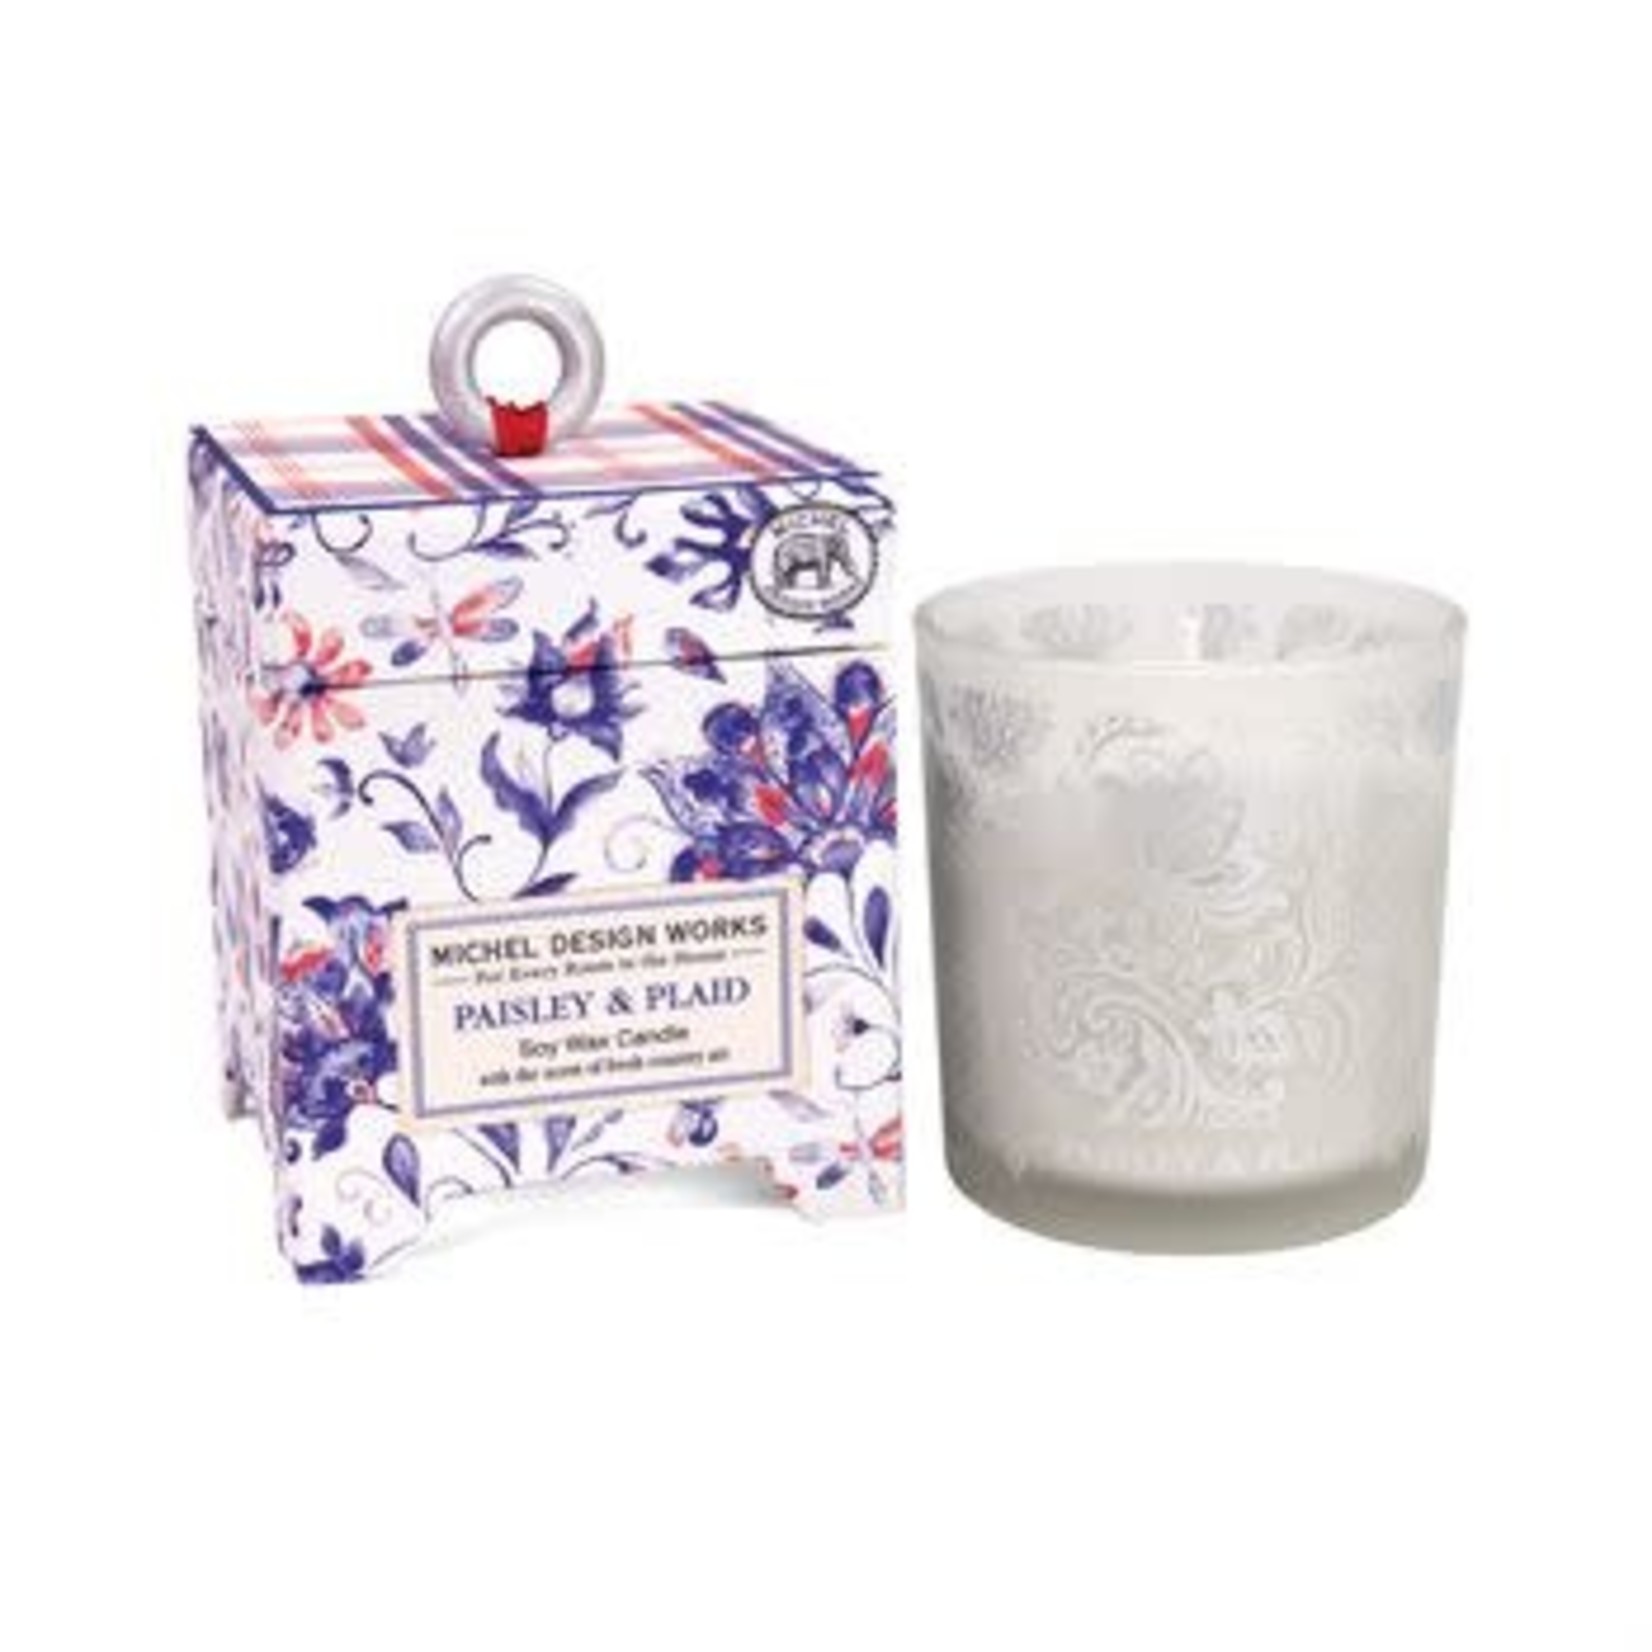 MICHELE DESIGN WORKS PAISLEY & PLAID SOY CANDLE